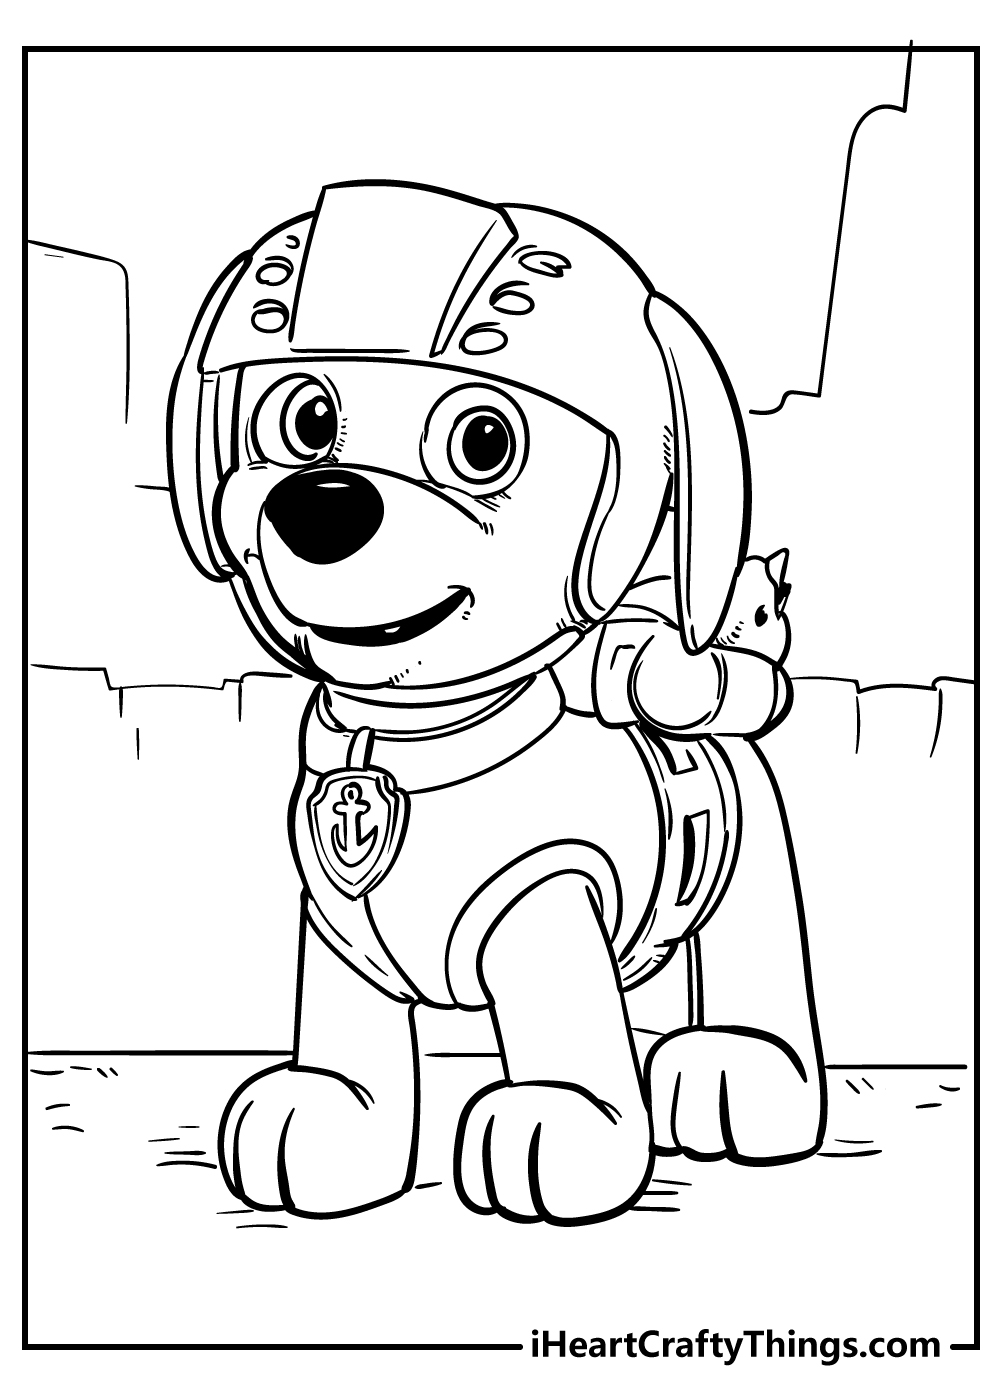 Paw patrol coloring pages free printables